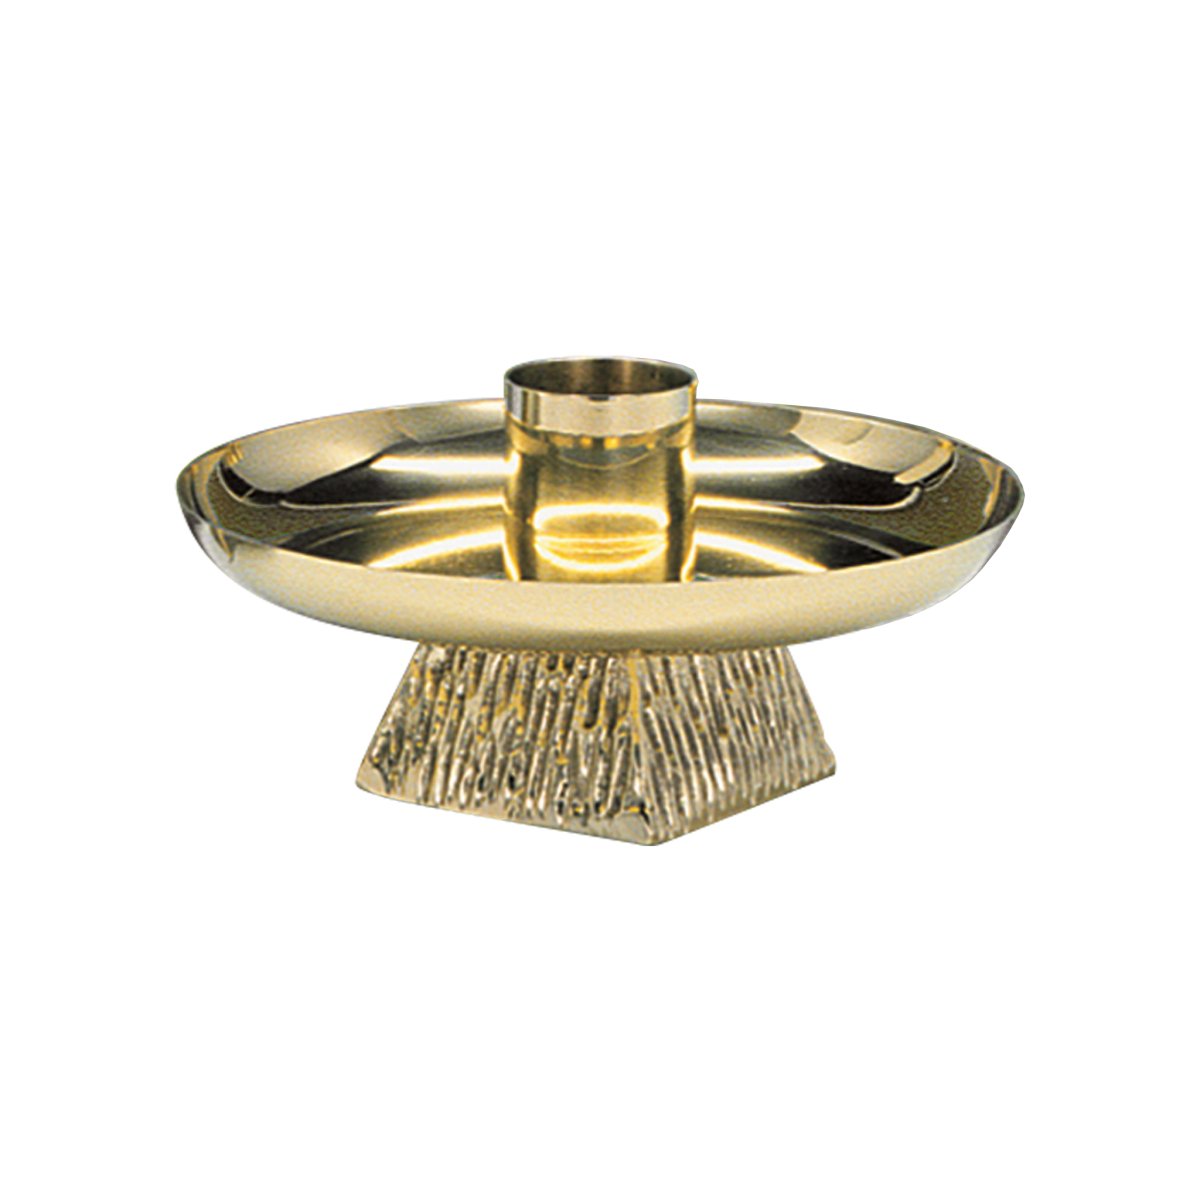 Textured Base Candlestick - Hayes & Finch